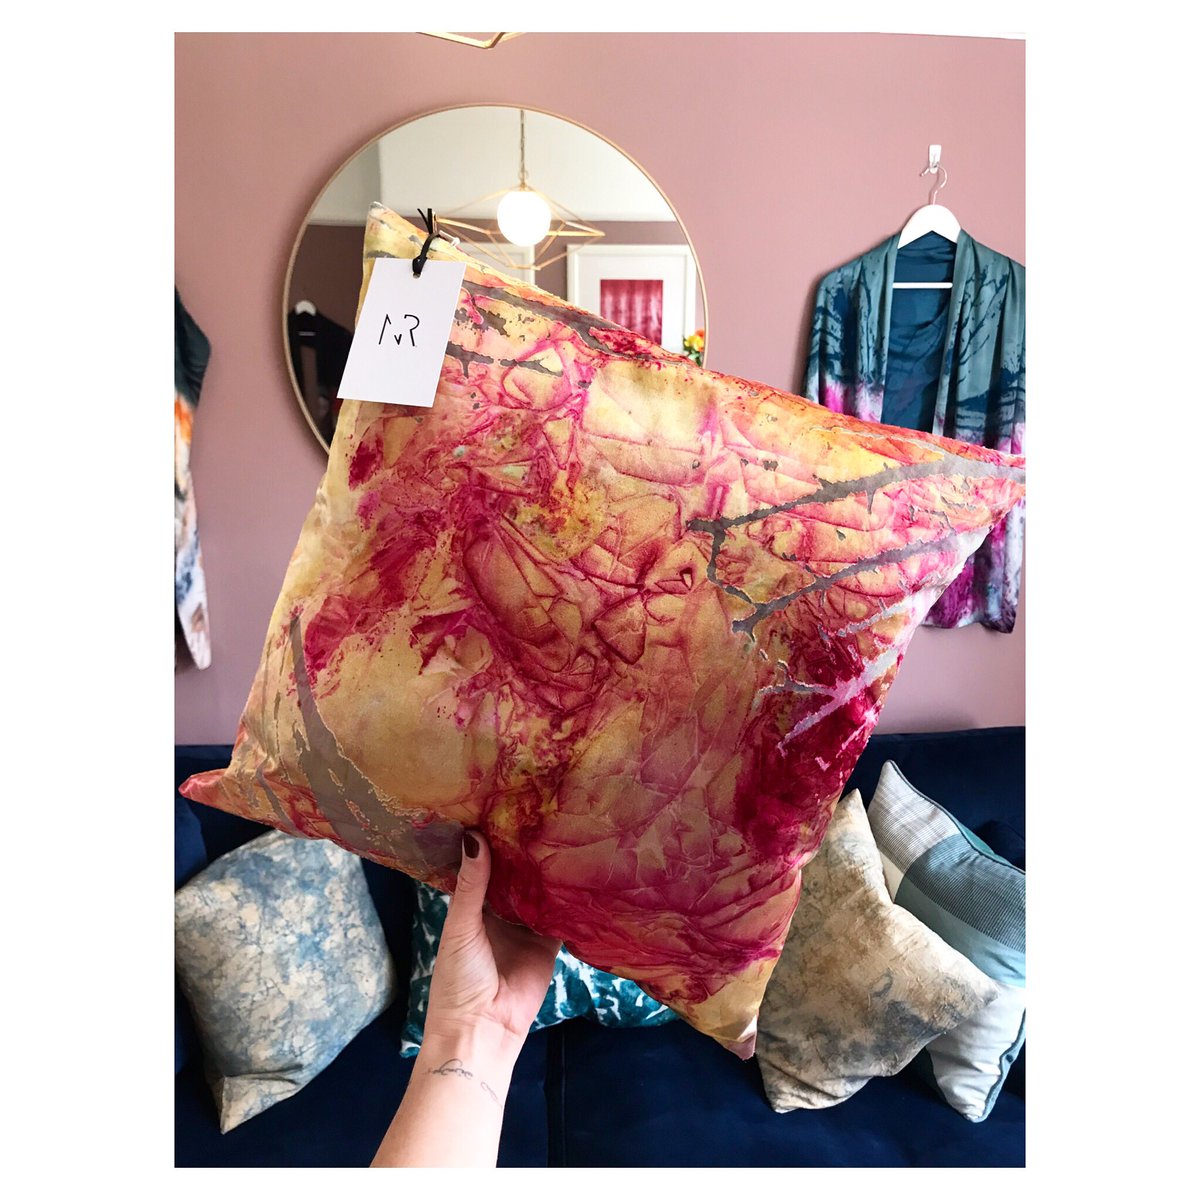 We have some new editions for the collection especially for @yorkopenstudios made up for us by the talented @wearitwellsewing .
.
#cushion #luxuryinteriors #luxury #handmade #craft #textiles #textileart #textilartist #yorkshiretextiles #york #yorkopenstudios #YOSwesties